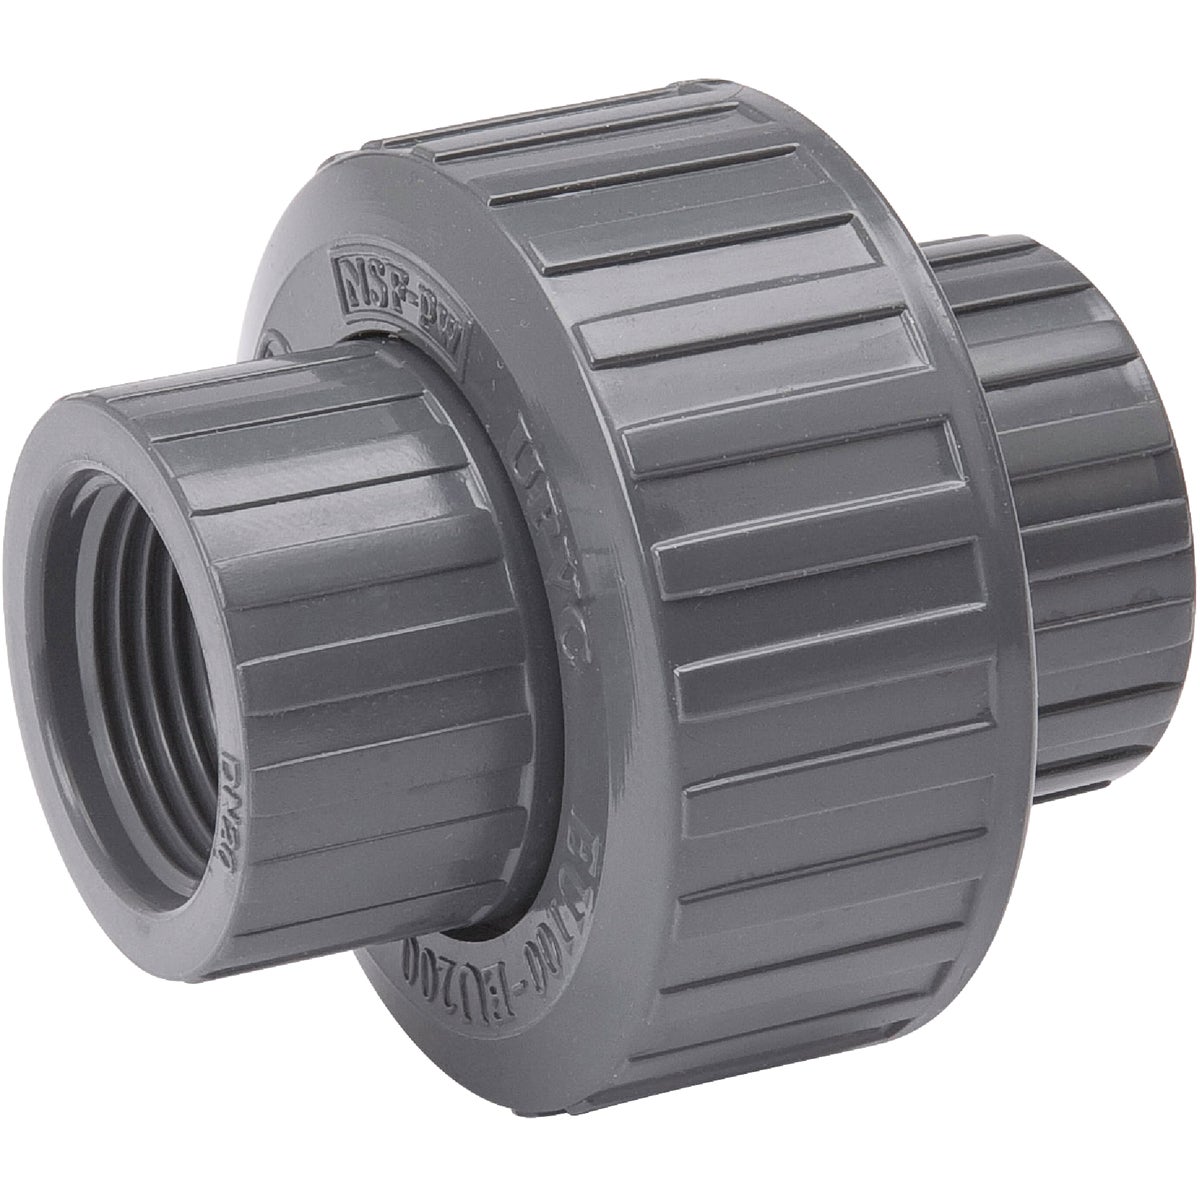 Item 404497, Heavy-duty Schedule 80 PVC construction. Threaded ends comply with ANSIB2.